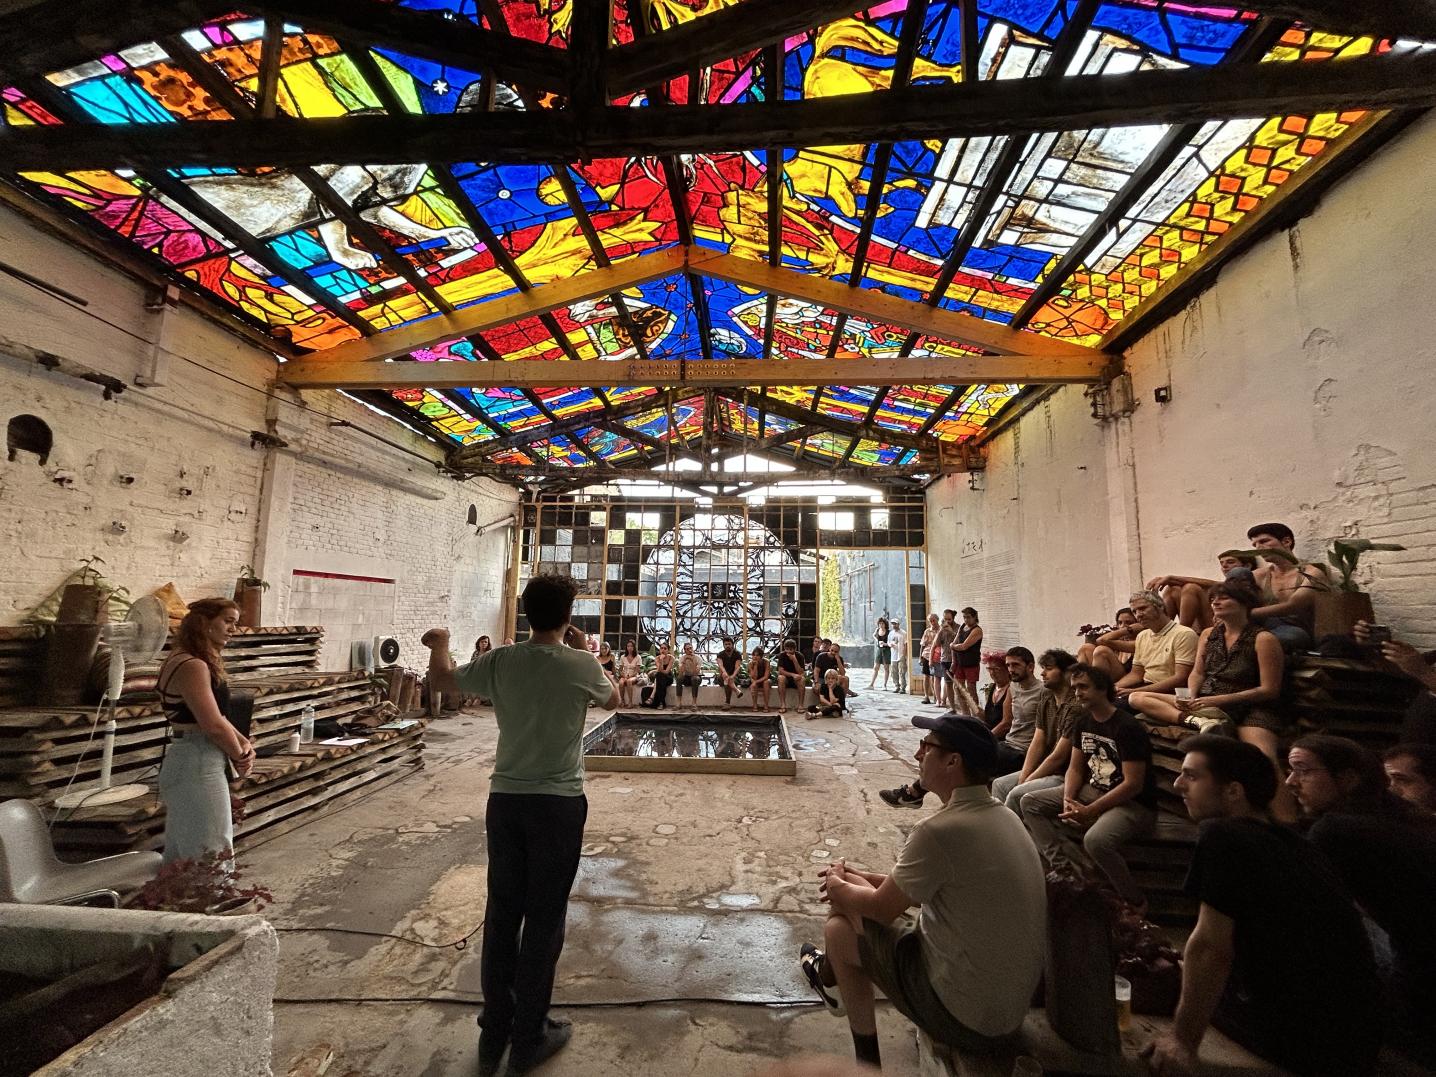 People sitting in an old empty stable like building with a stained galss roof, listening to someone speak